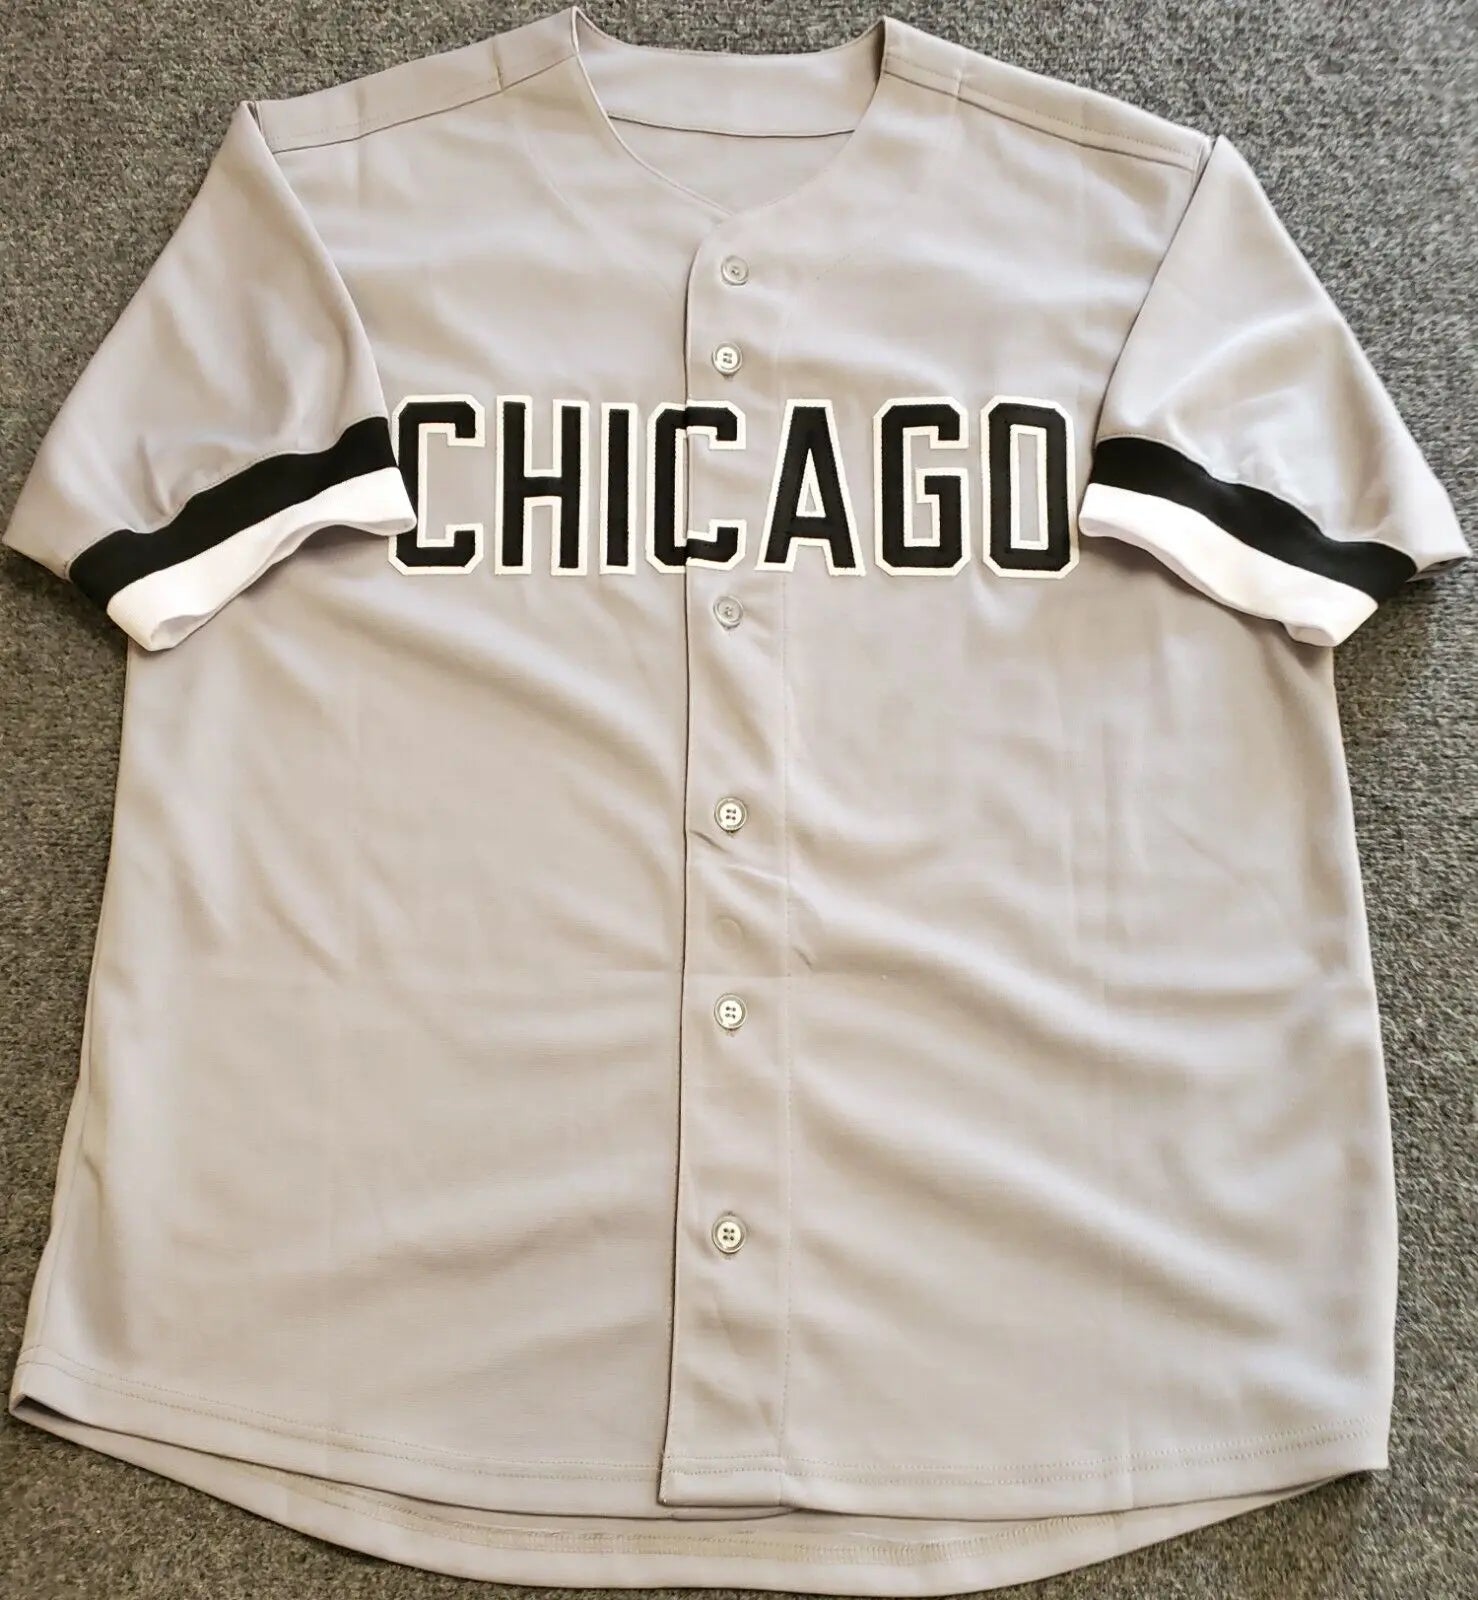 anderson jersey white sox